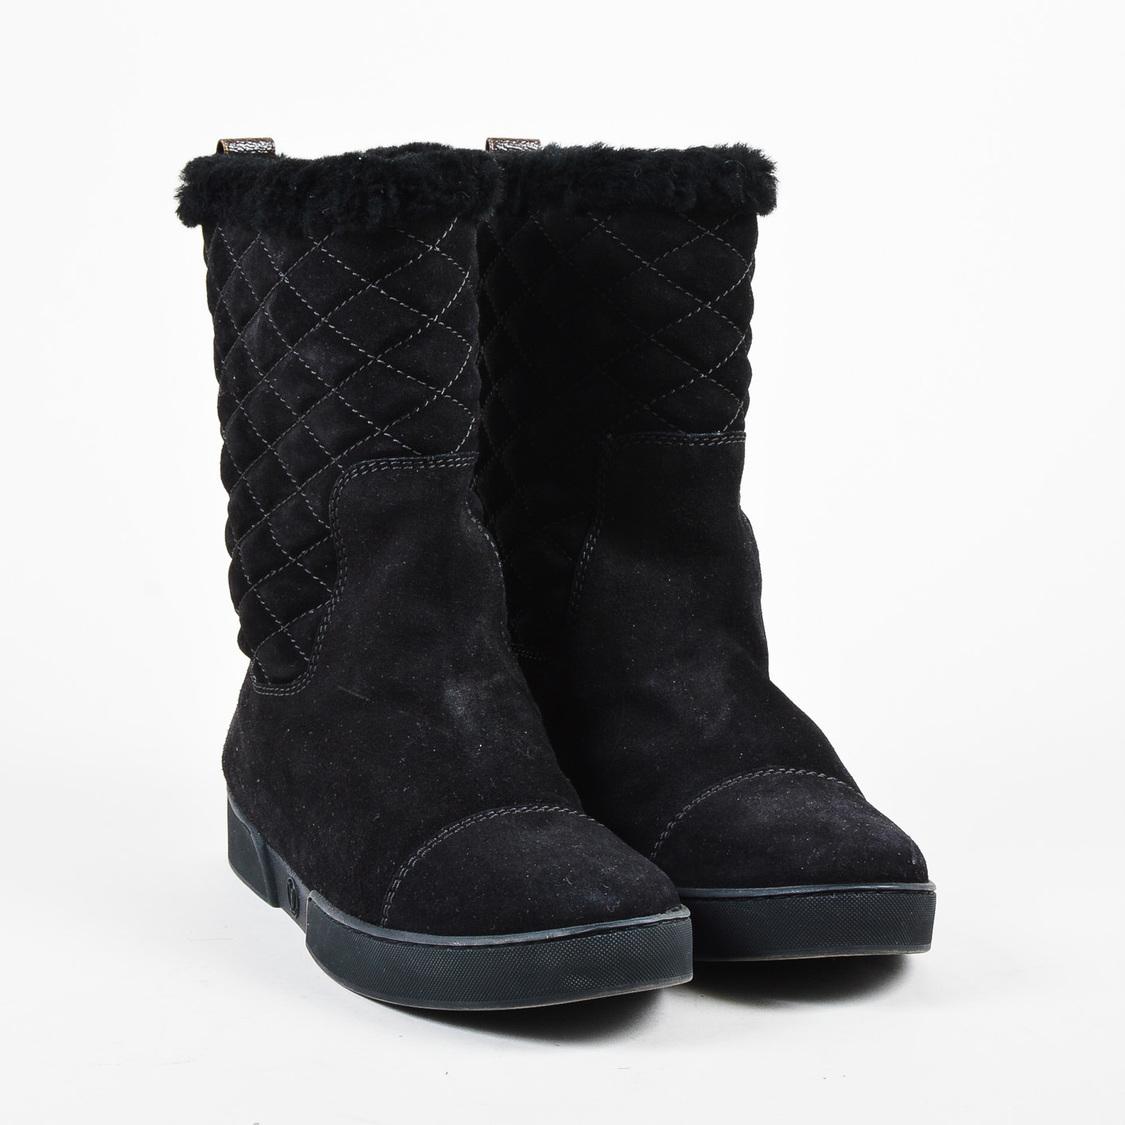 Lyst - Louis Vuitton Black Quilted Suede Faux Fur Lined Platform Mid Calf Boots in Black - Save ...